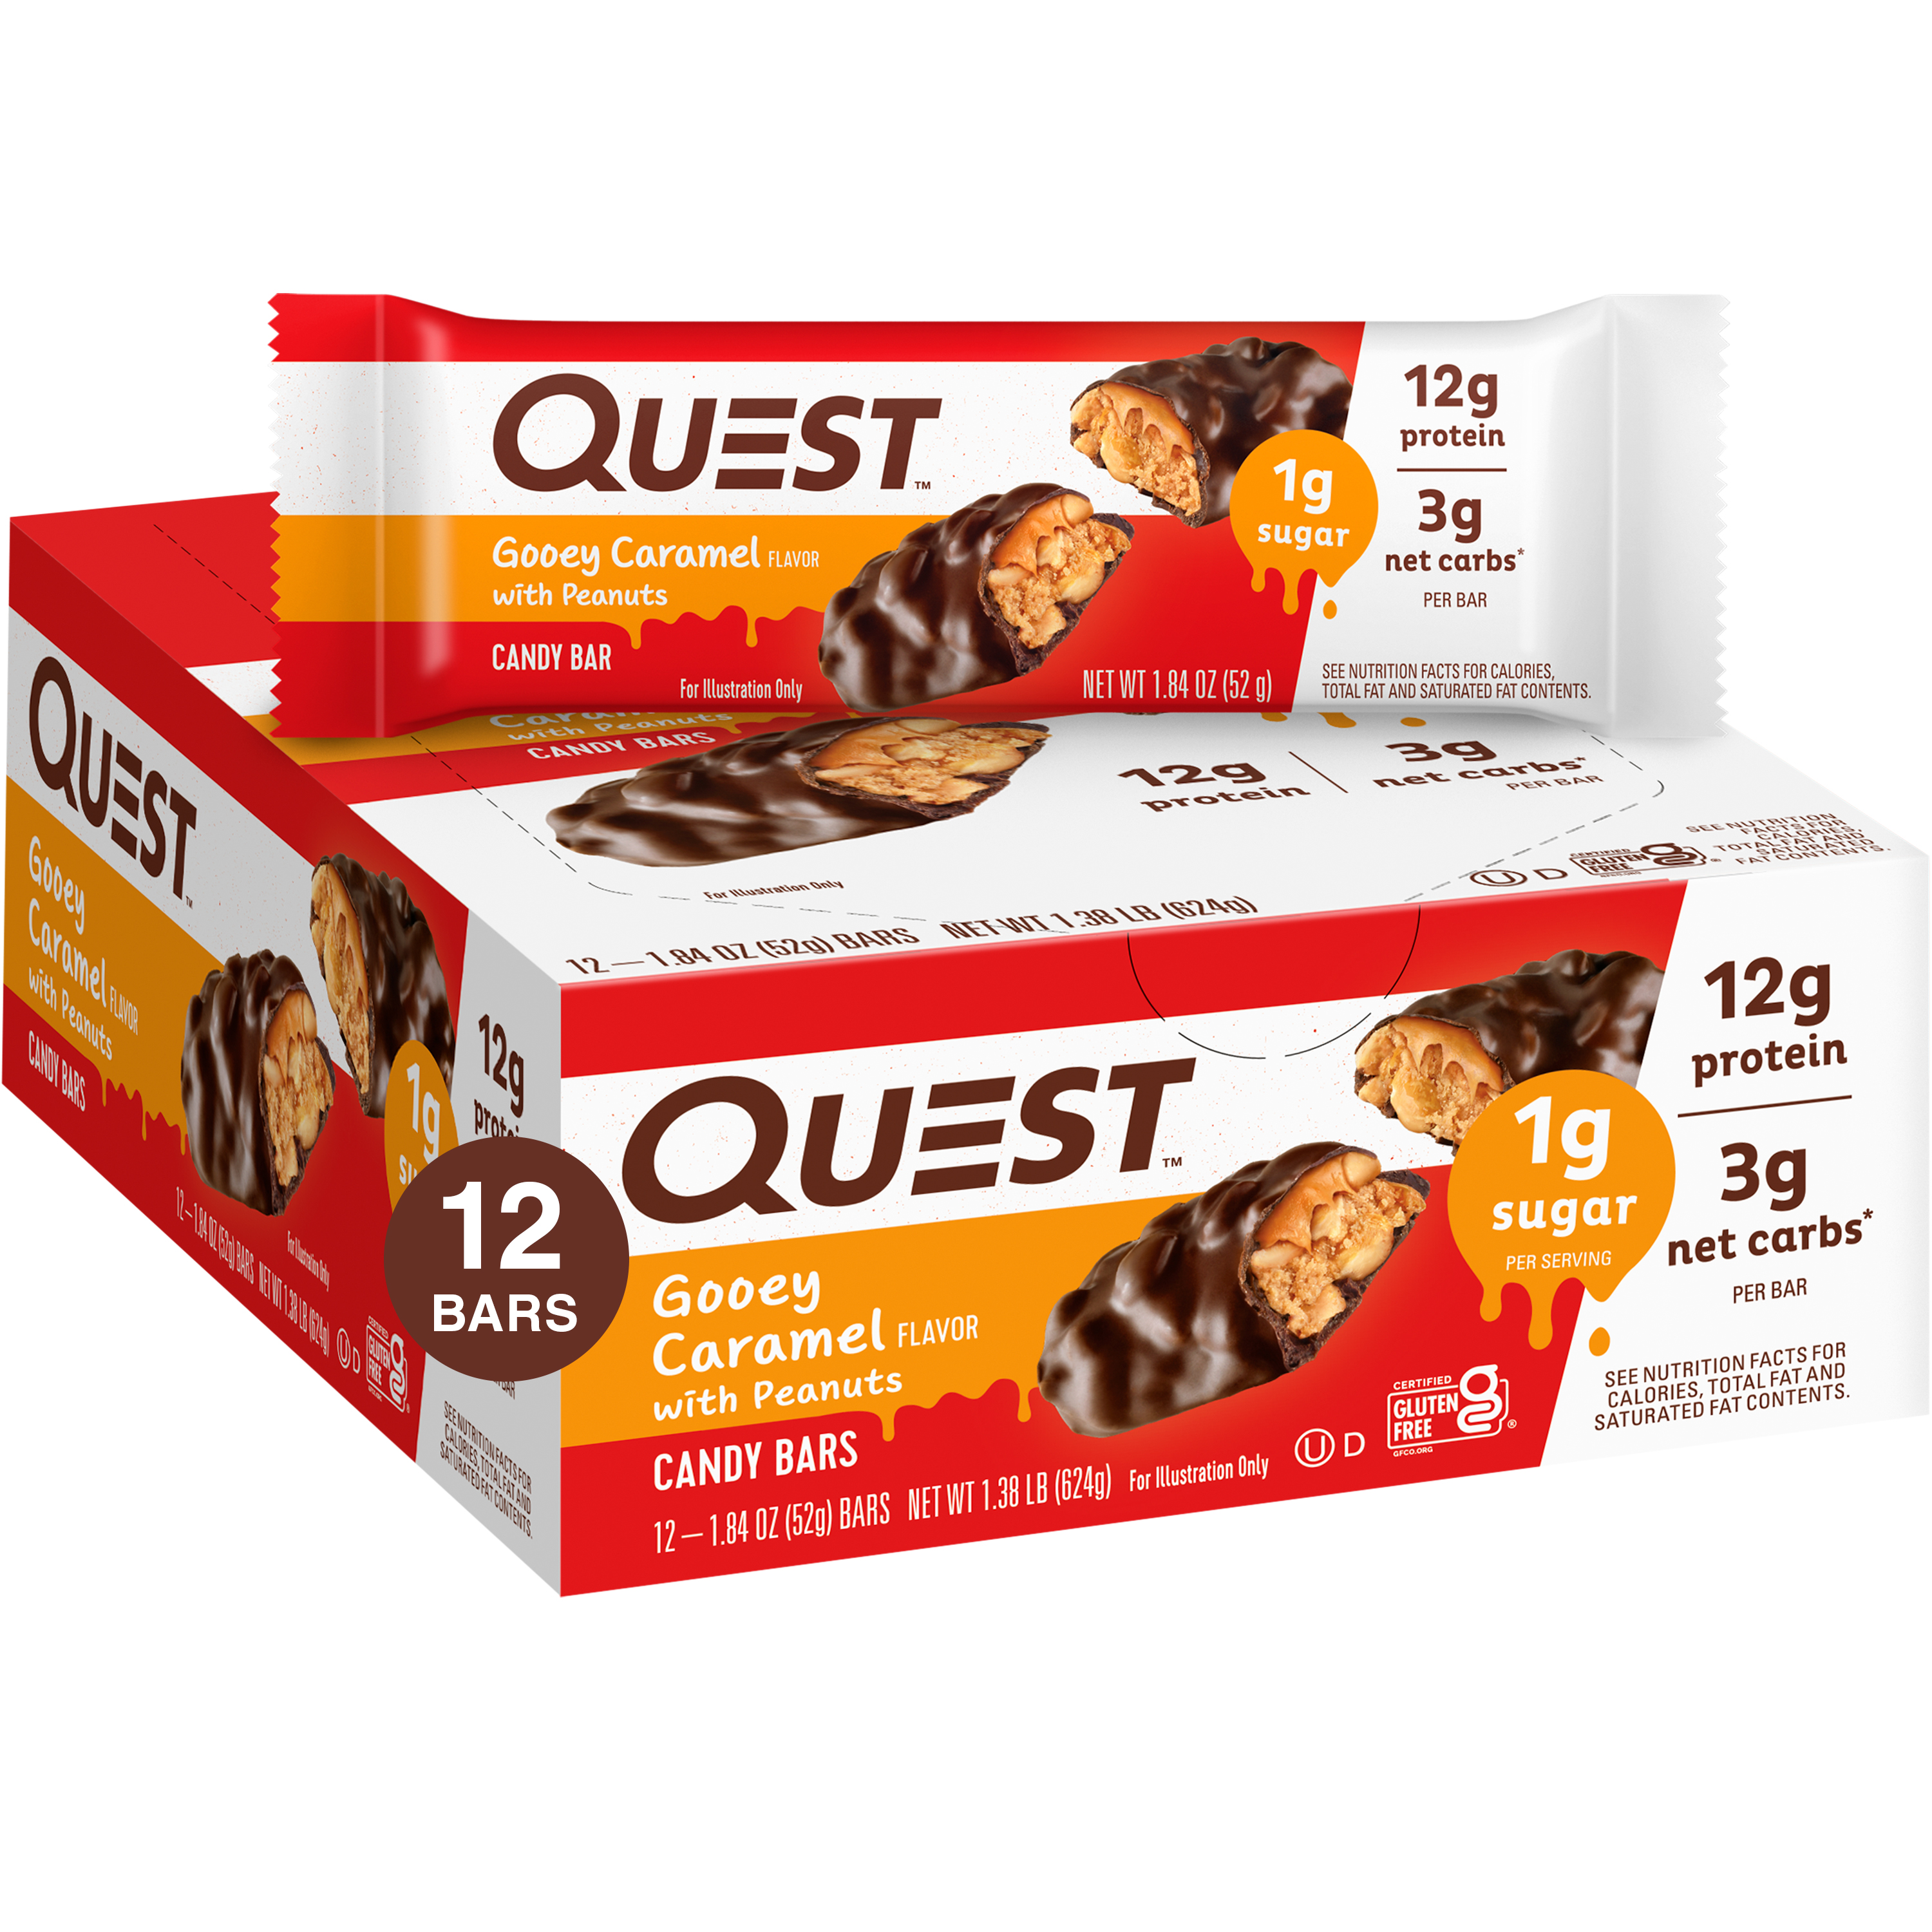 Quest Protein Candy Bar Snacks, Gooey Caramel with Peanuts flavor,  12 Count - image 1 of 11